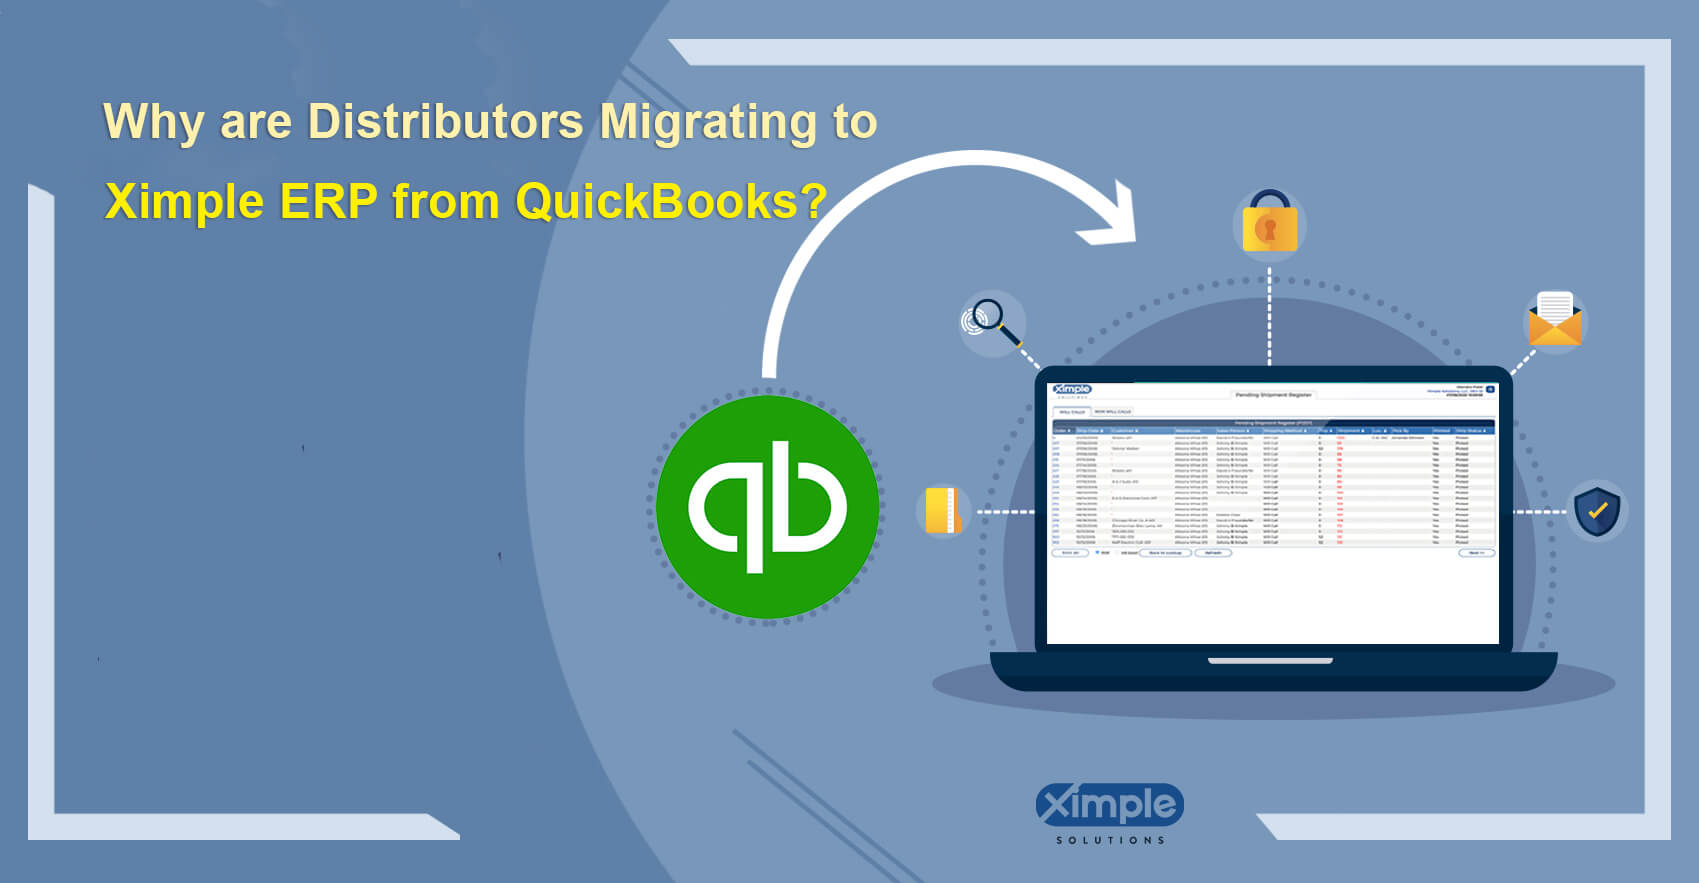 What is Quickbooks software?